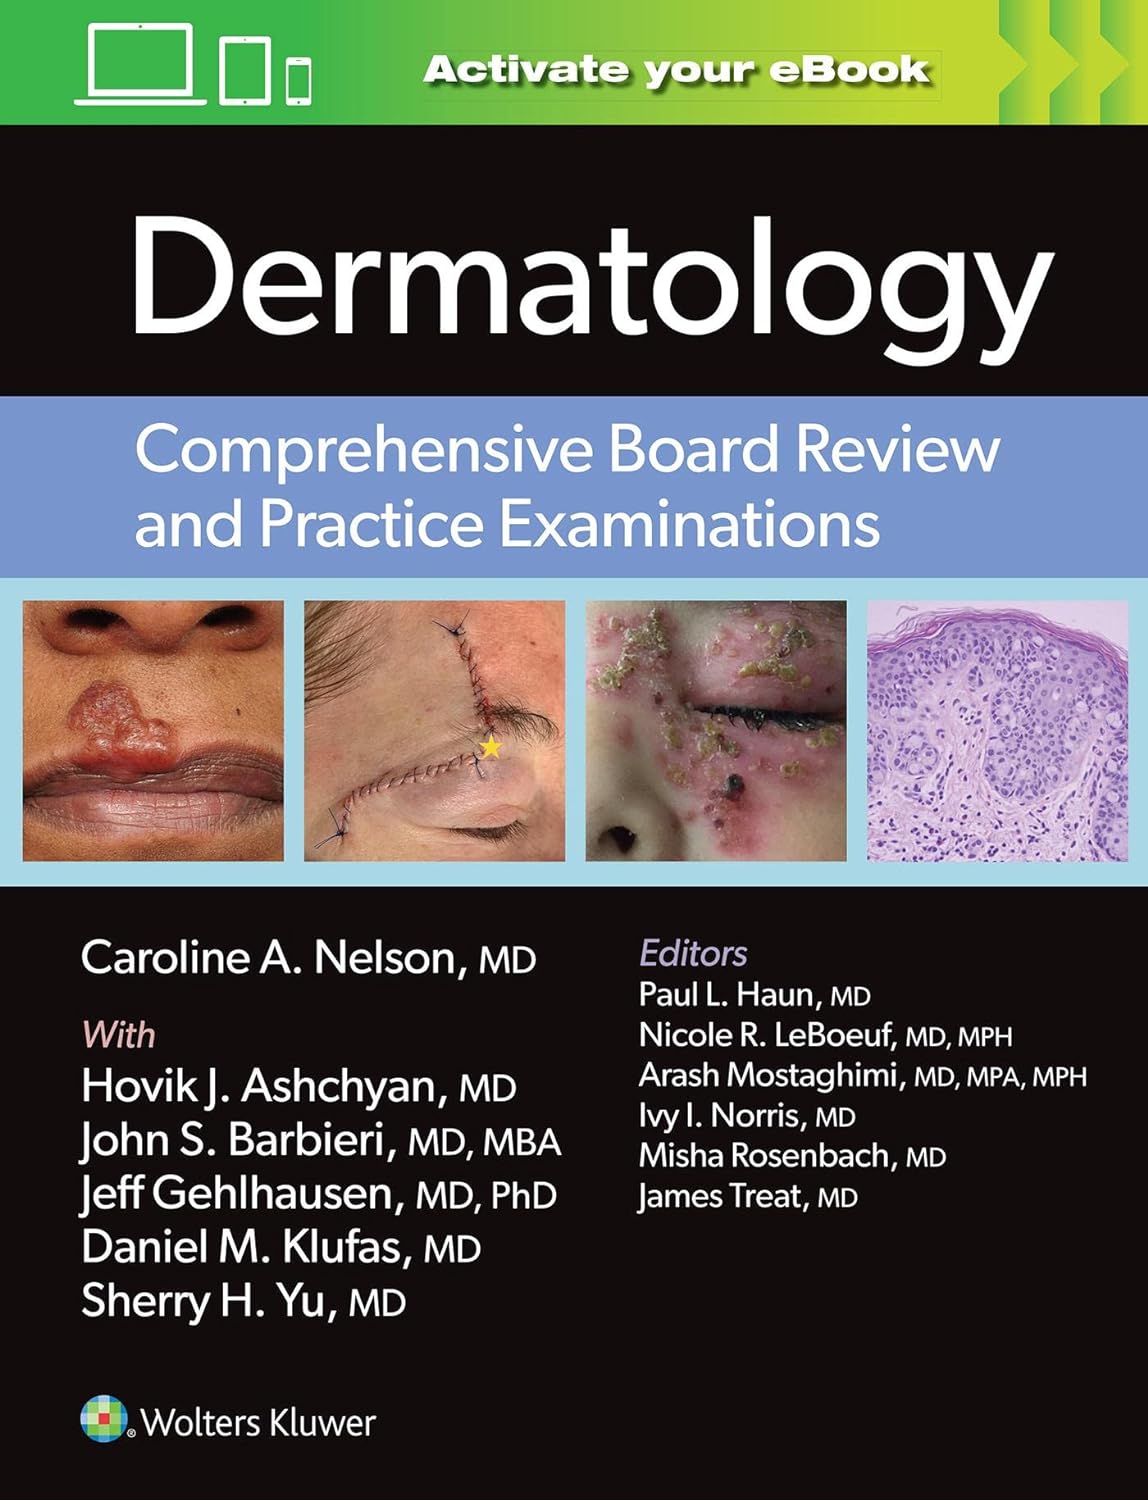 dermatology illustrated study guide and comprehensive board review free download